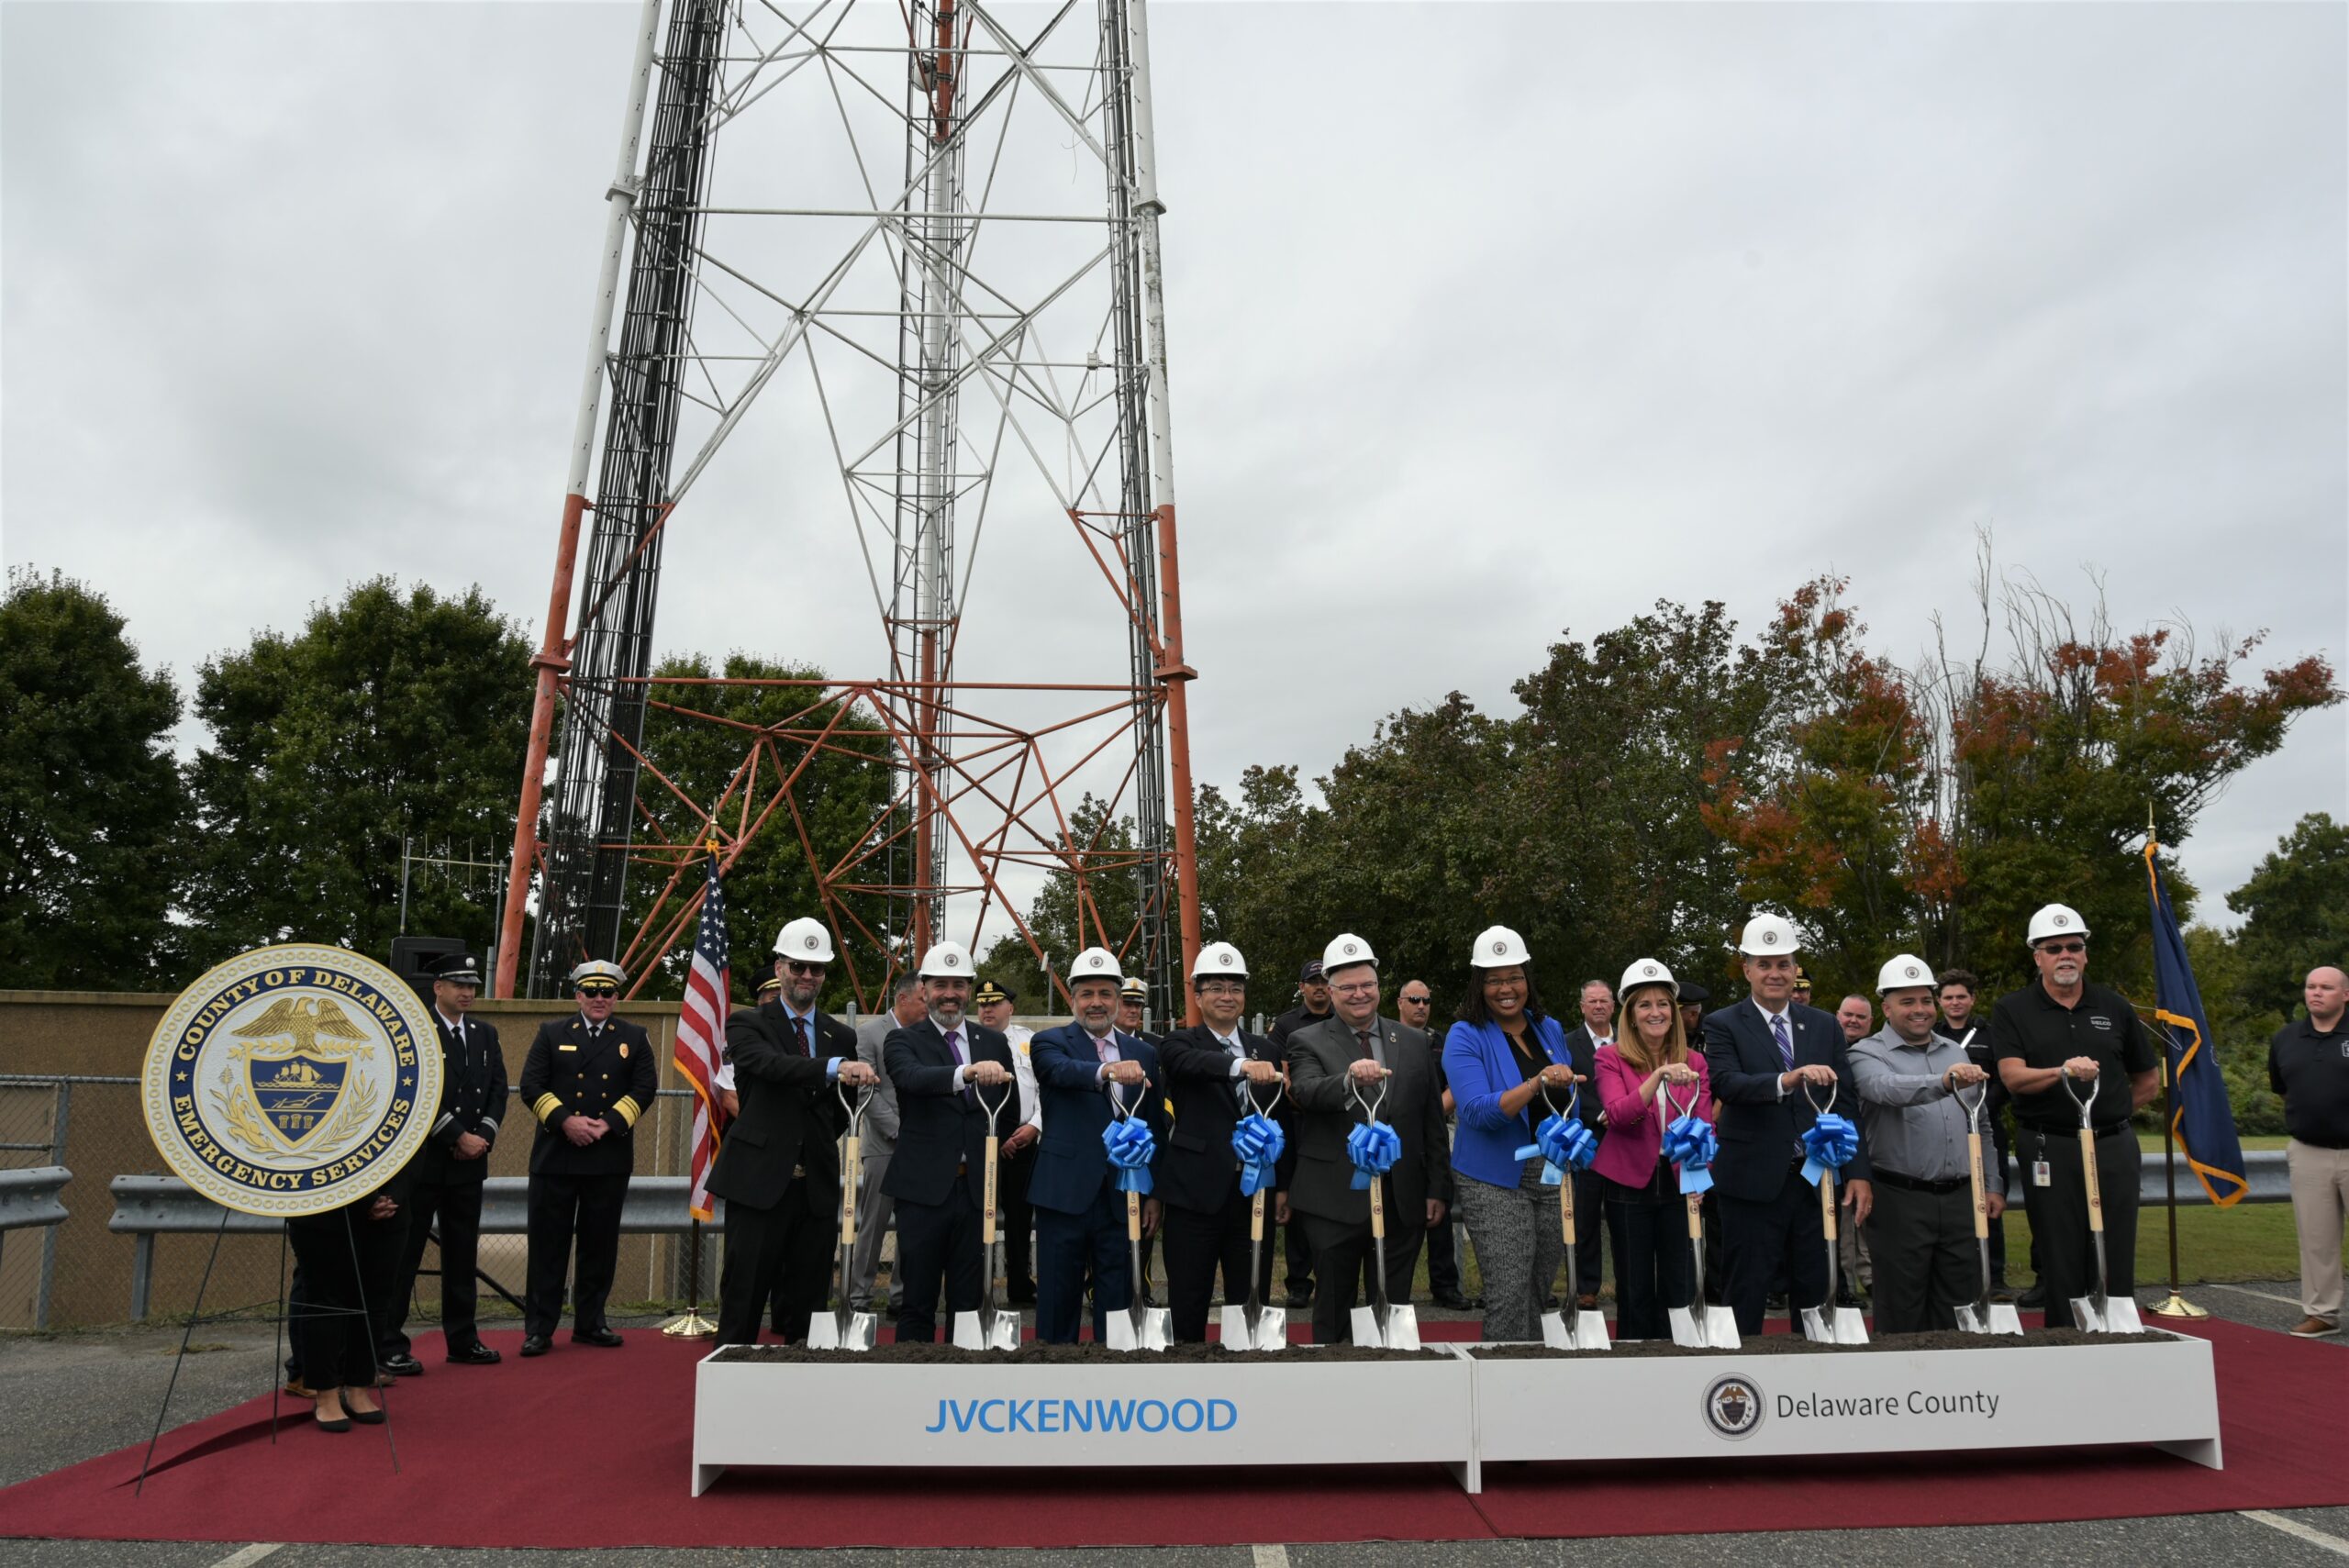 Delco Breaks Ground on Major Public Safety Radio System Project